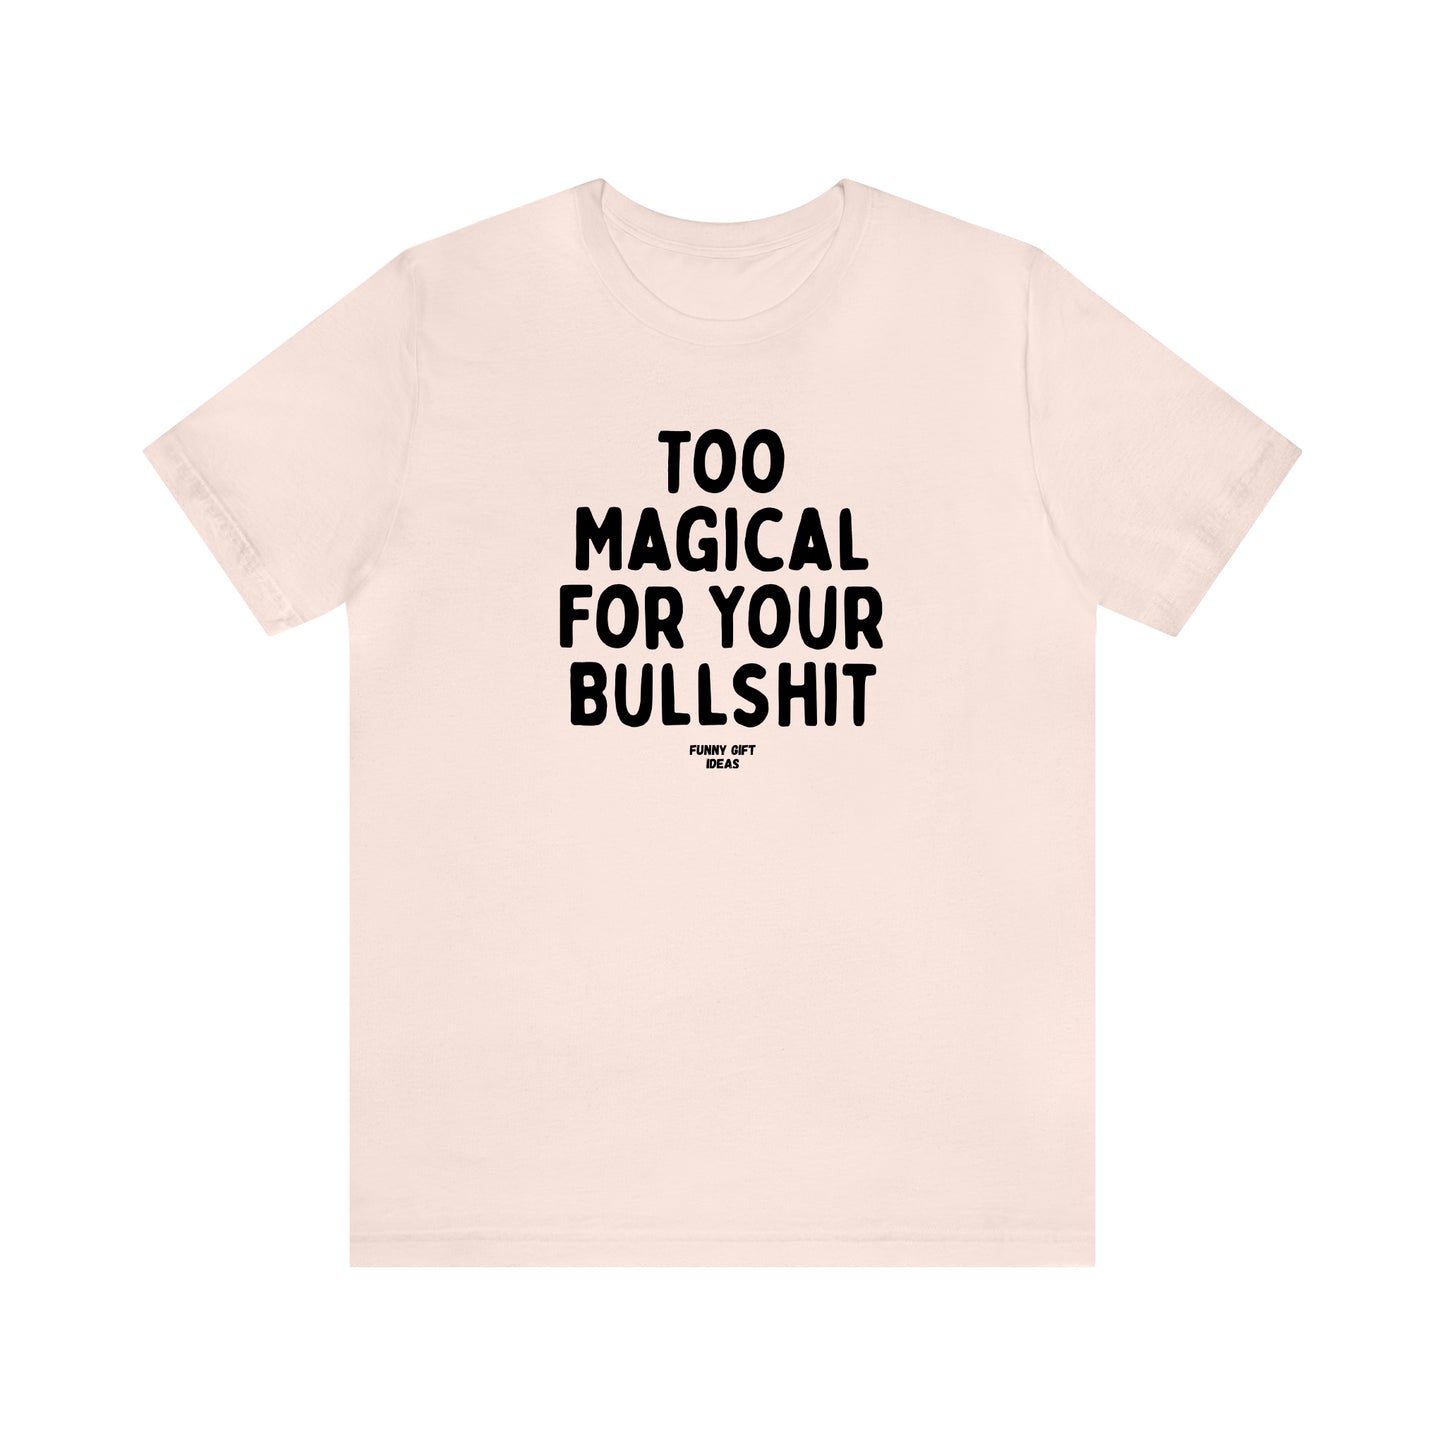 Funny Shirts for Women - Too Magical for Your Bullshit - Women's T Shirts